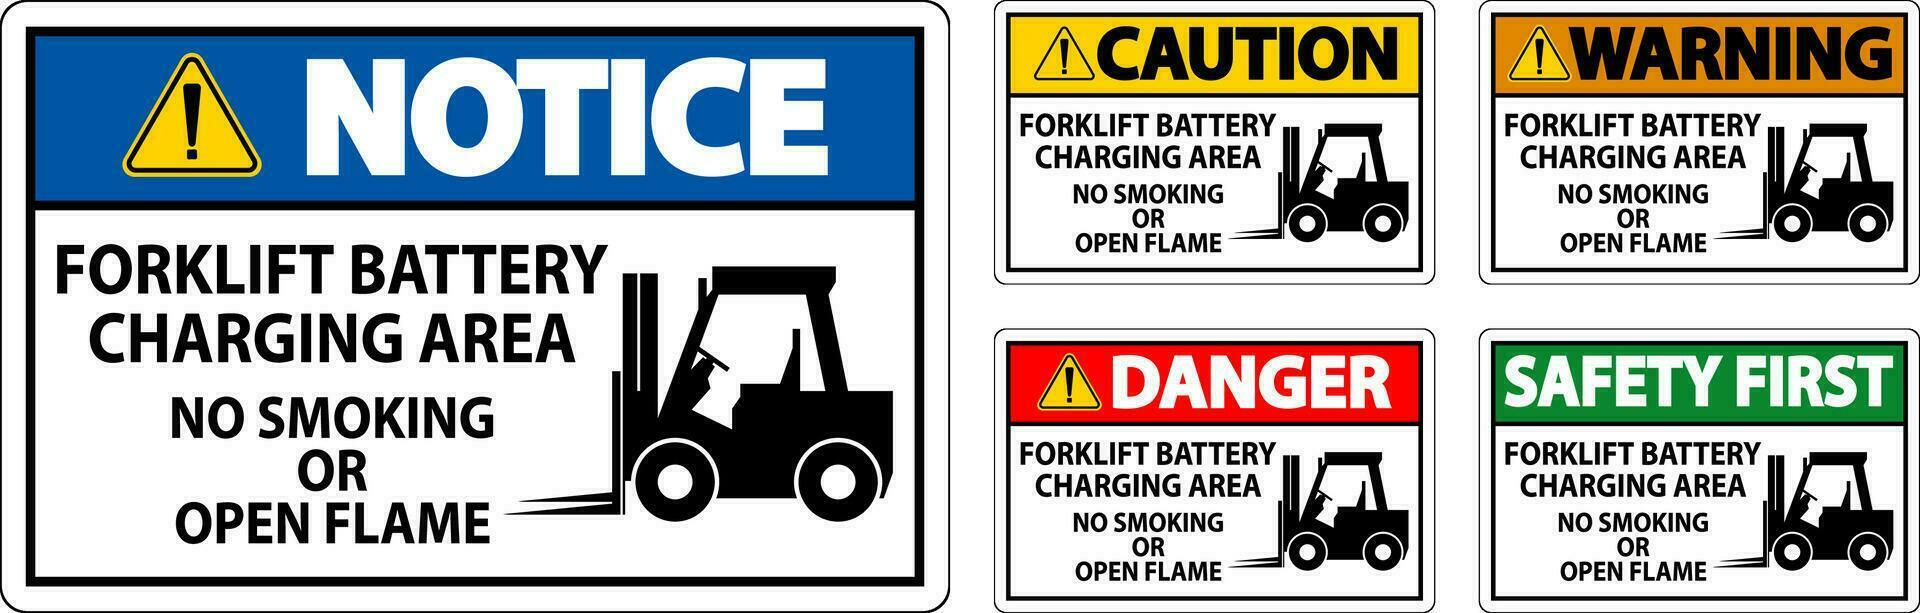 Danger Sign Forklift Battery Charging Area, No Smoking Or Open Flame vector